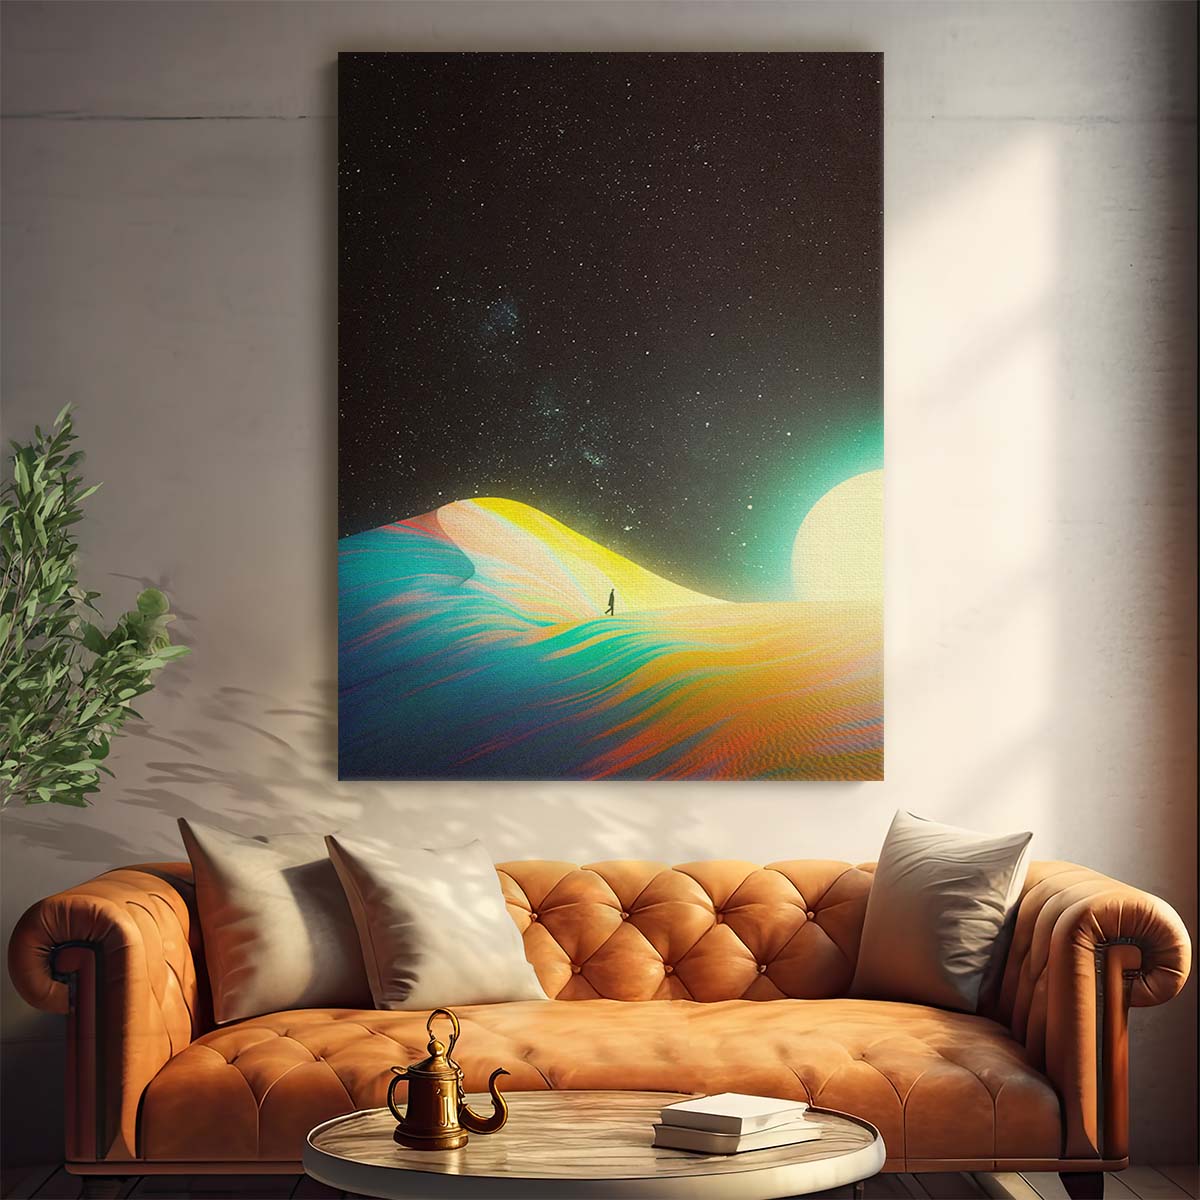 Surreal Space Travel Digital Collage Art by Taudalpoi by Luxuriance Designs, made in USA